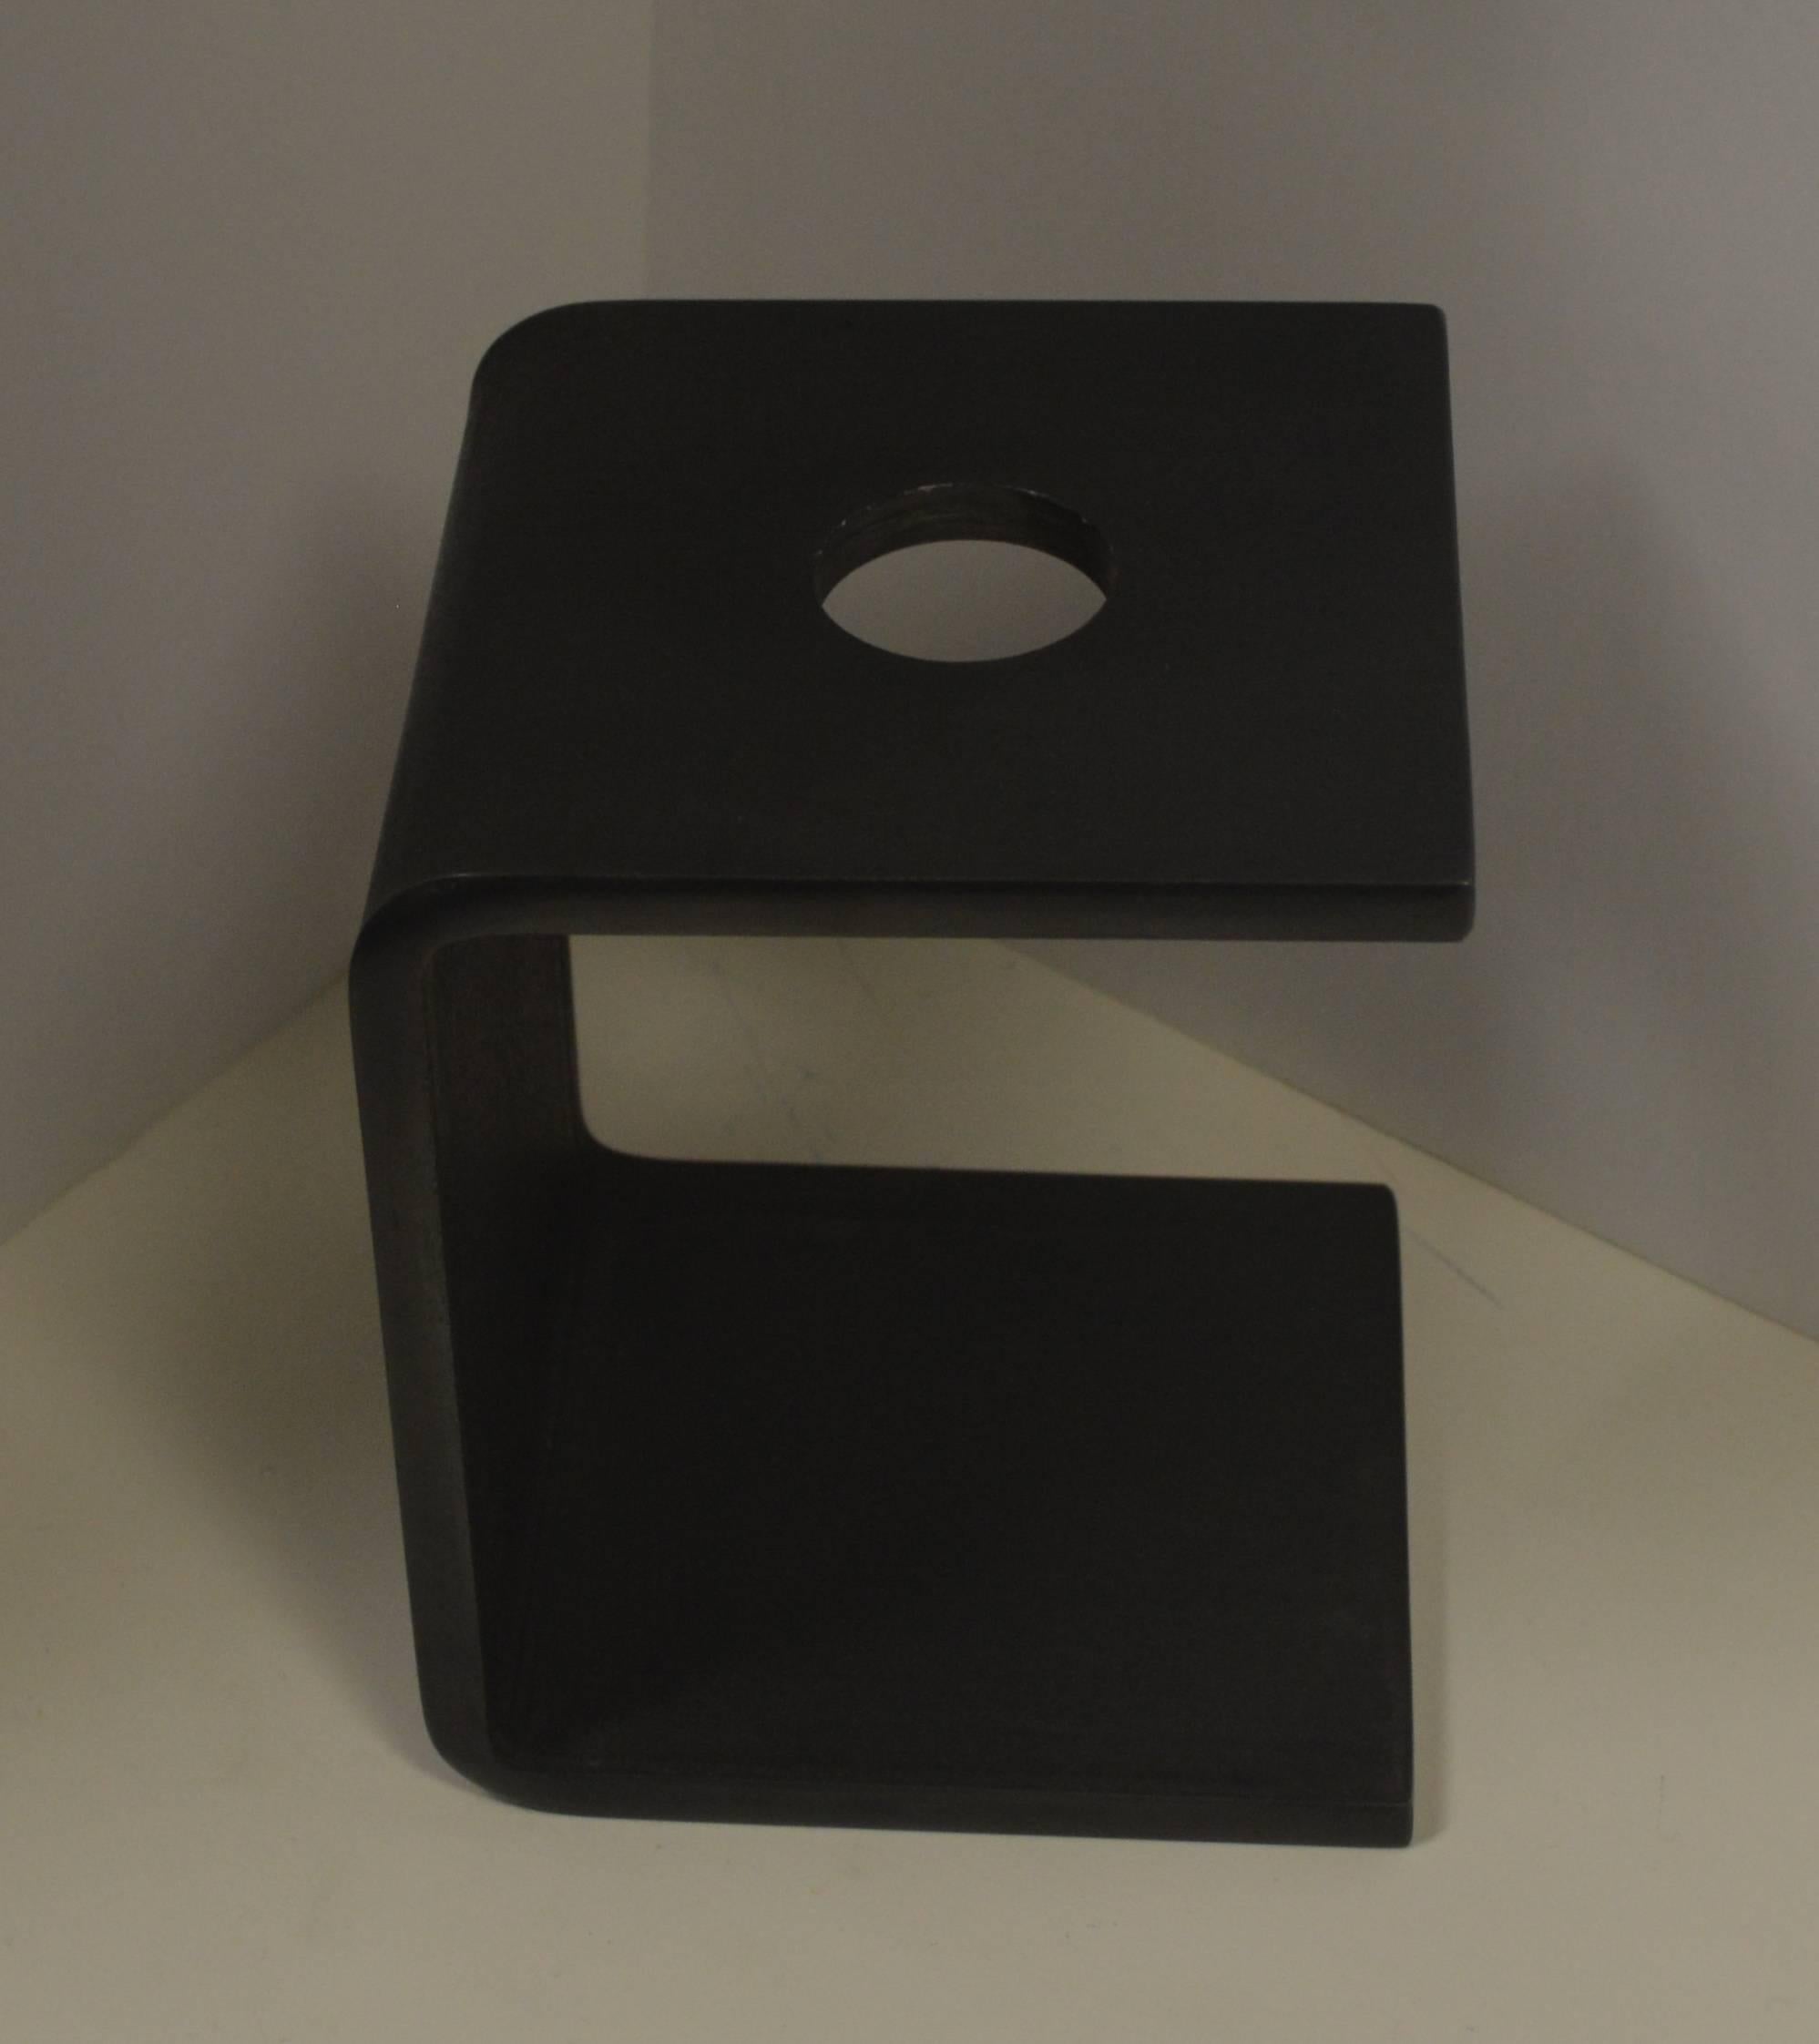 An original design by Scott Gordon, the Stowe candleholder is made from blackened steel and holds a 1-1/2